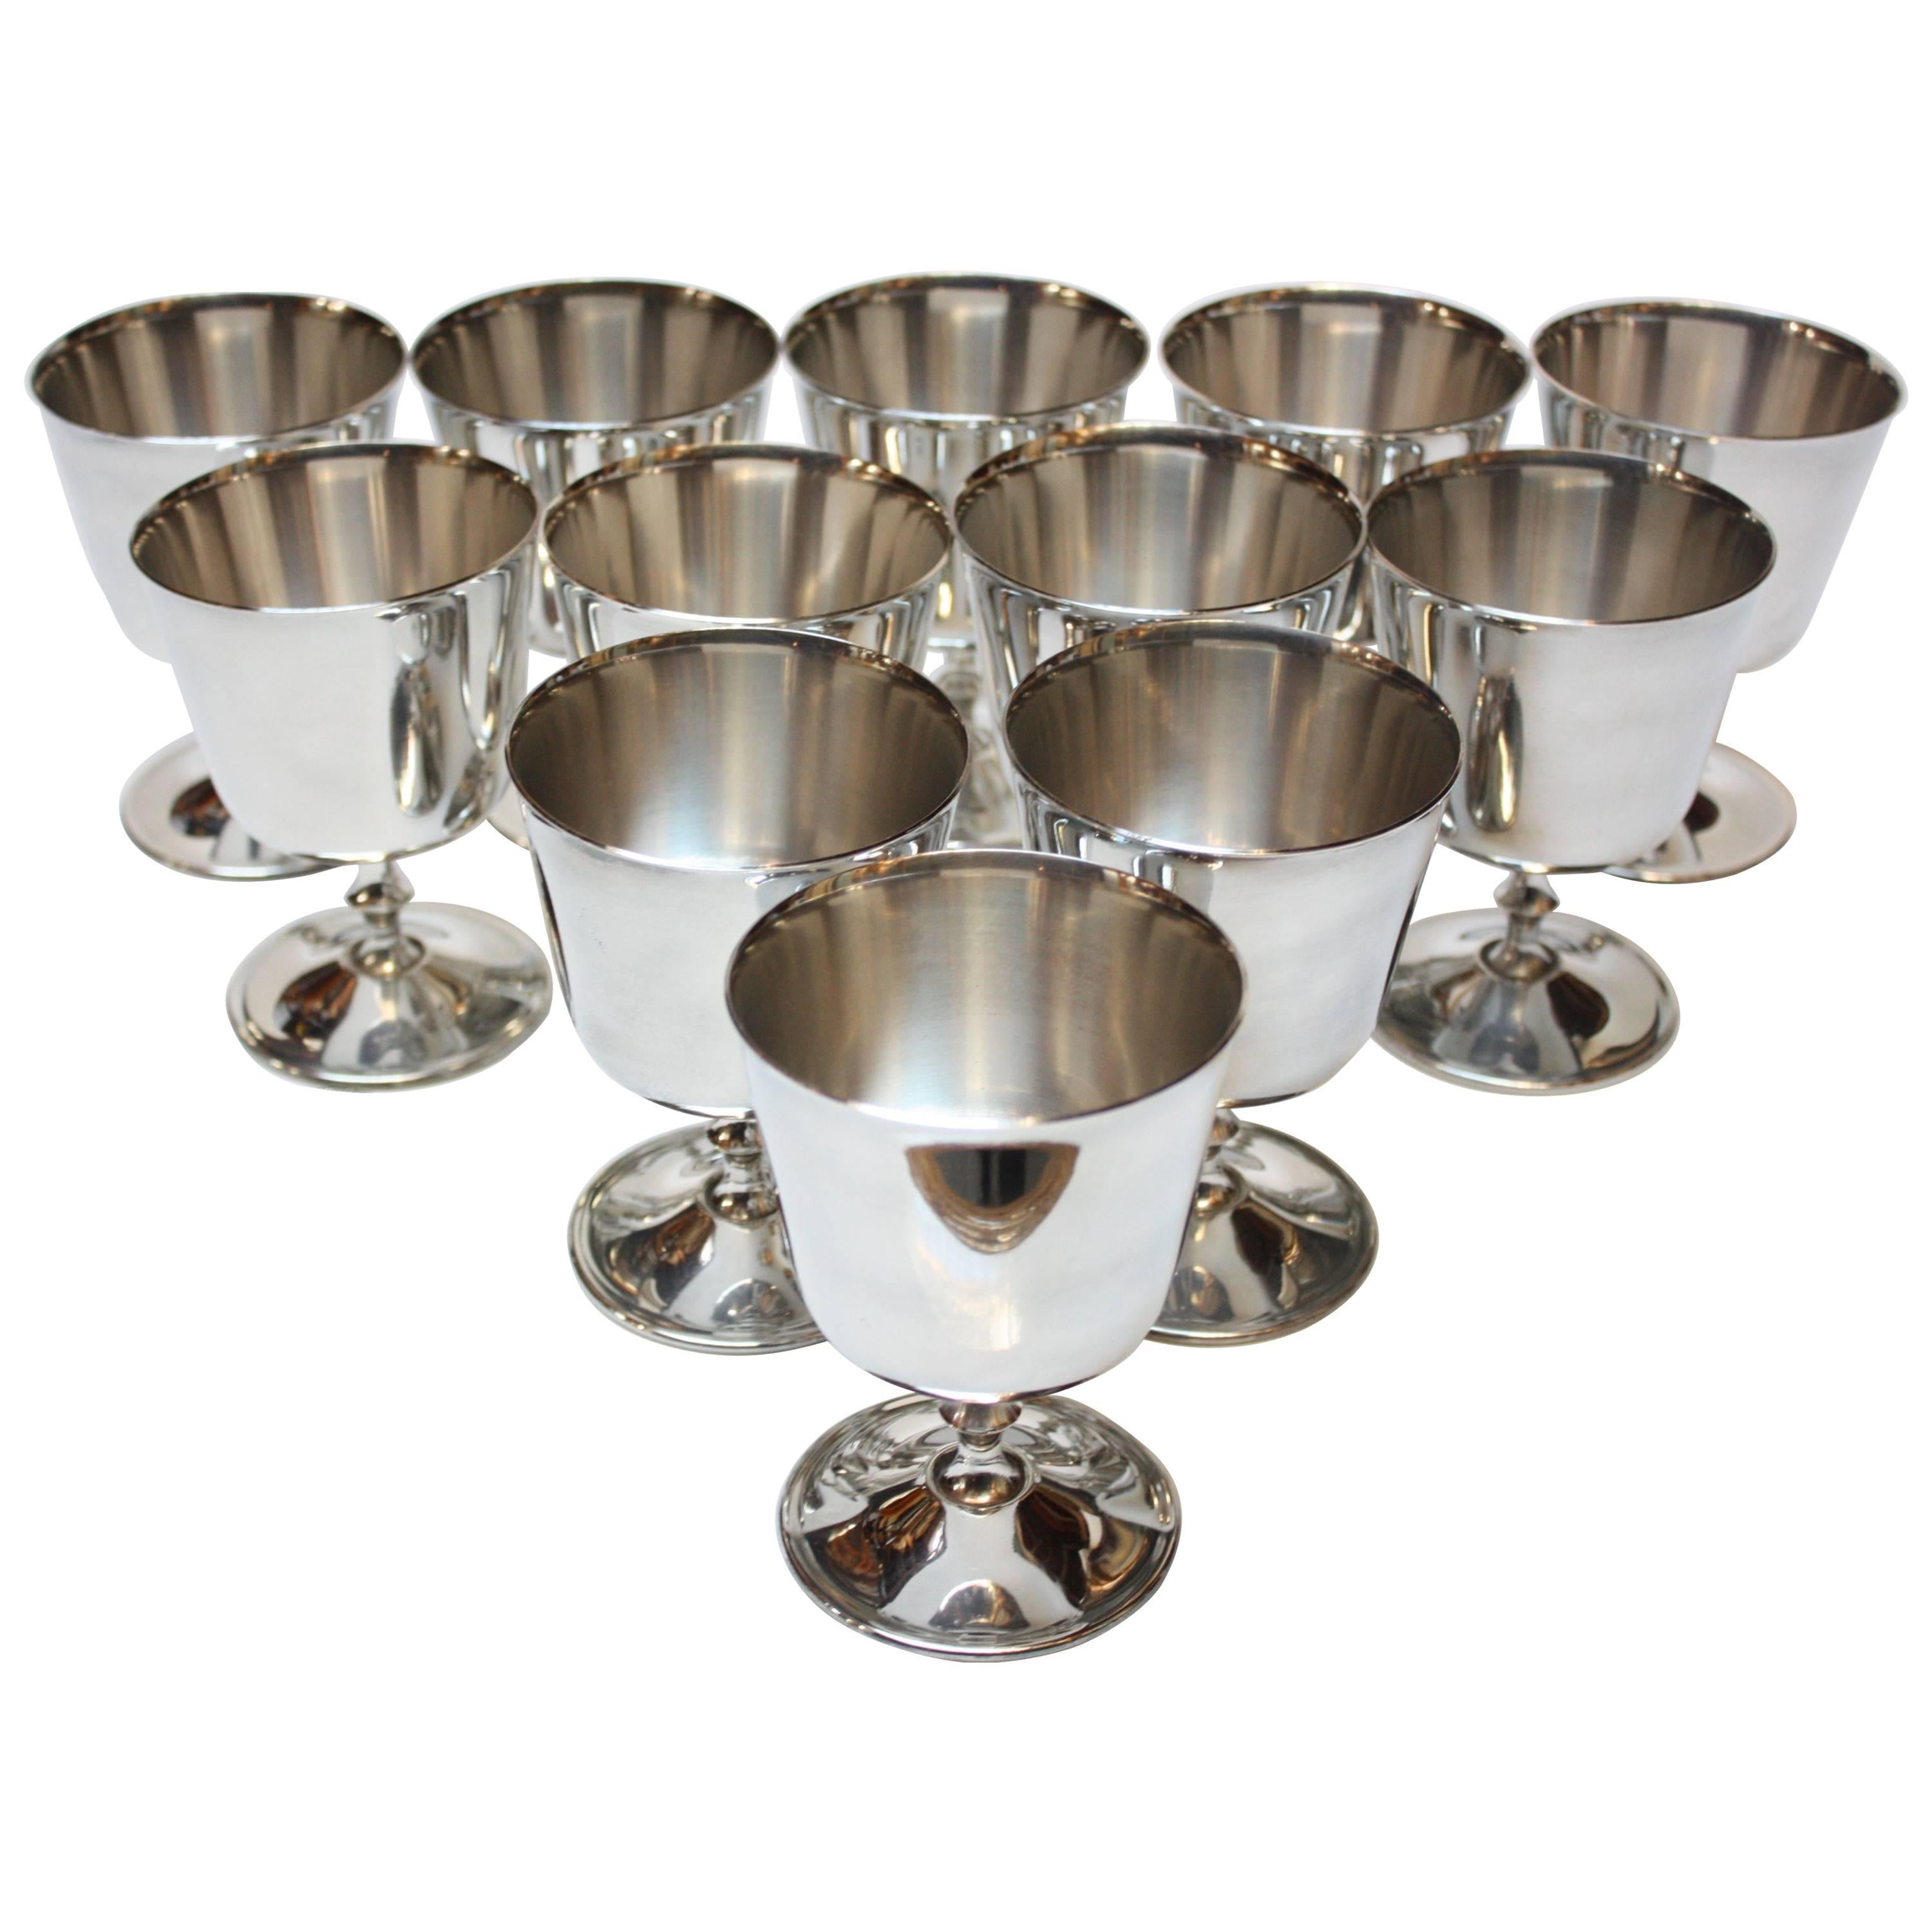 Set of 12 Italian Silver Plated Goblets